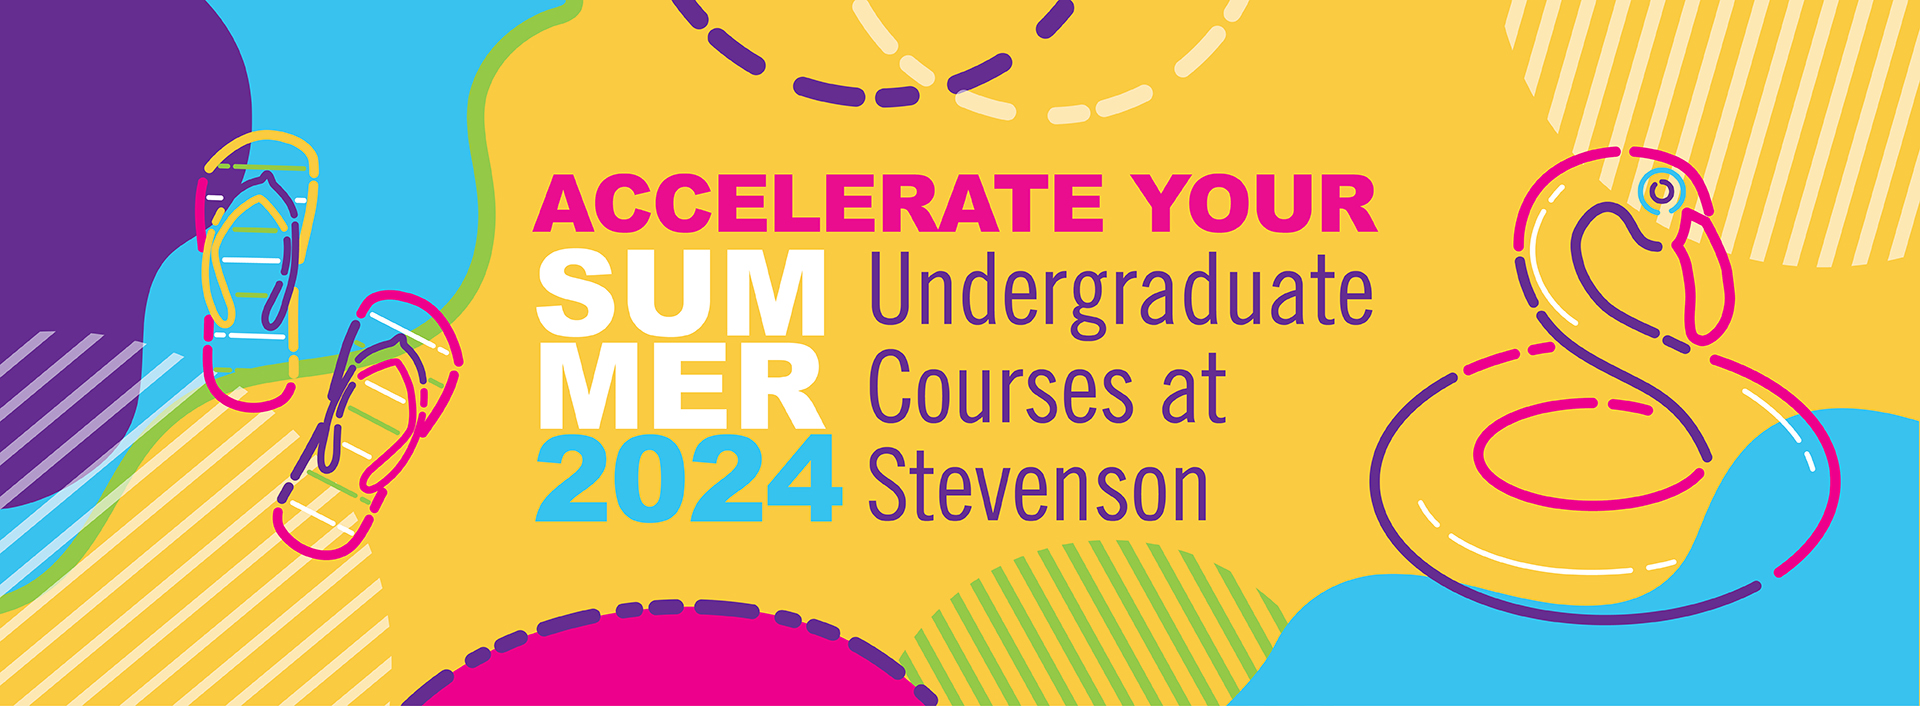 Accelerate Your 91 Education This Summer